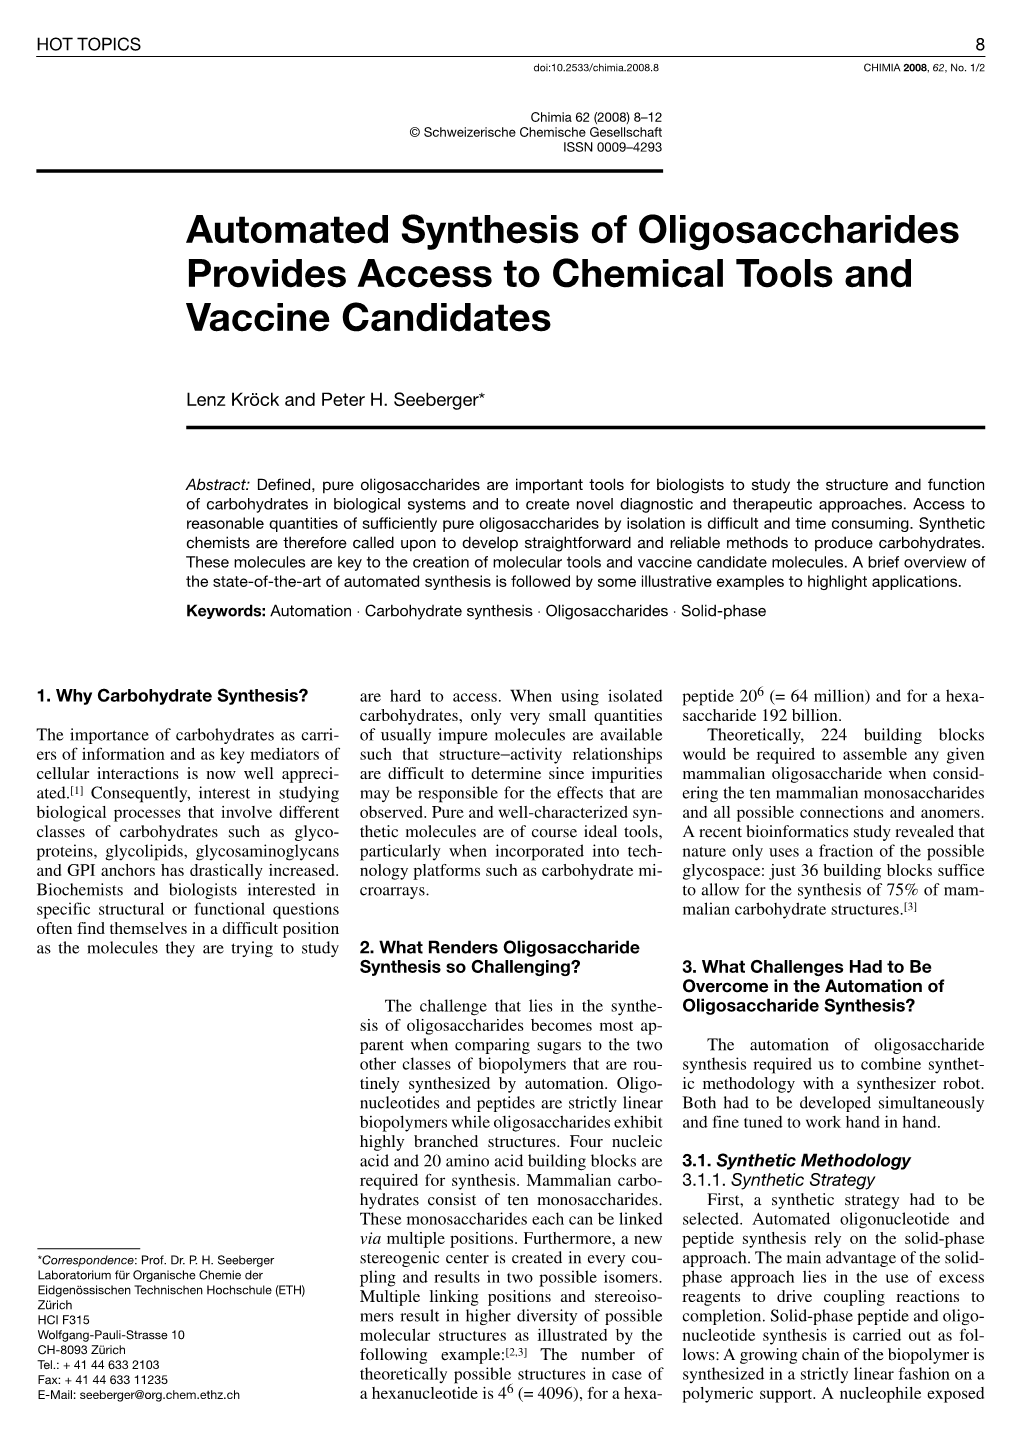 Automated Synthesis of Oligosaccharides Provides Access to Chemical Tools and Vaccine Candidates